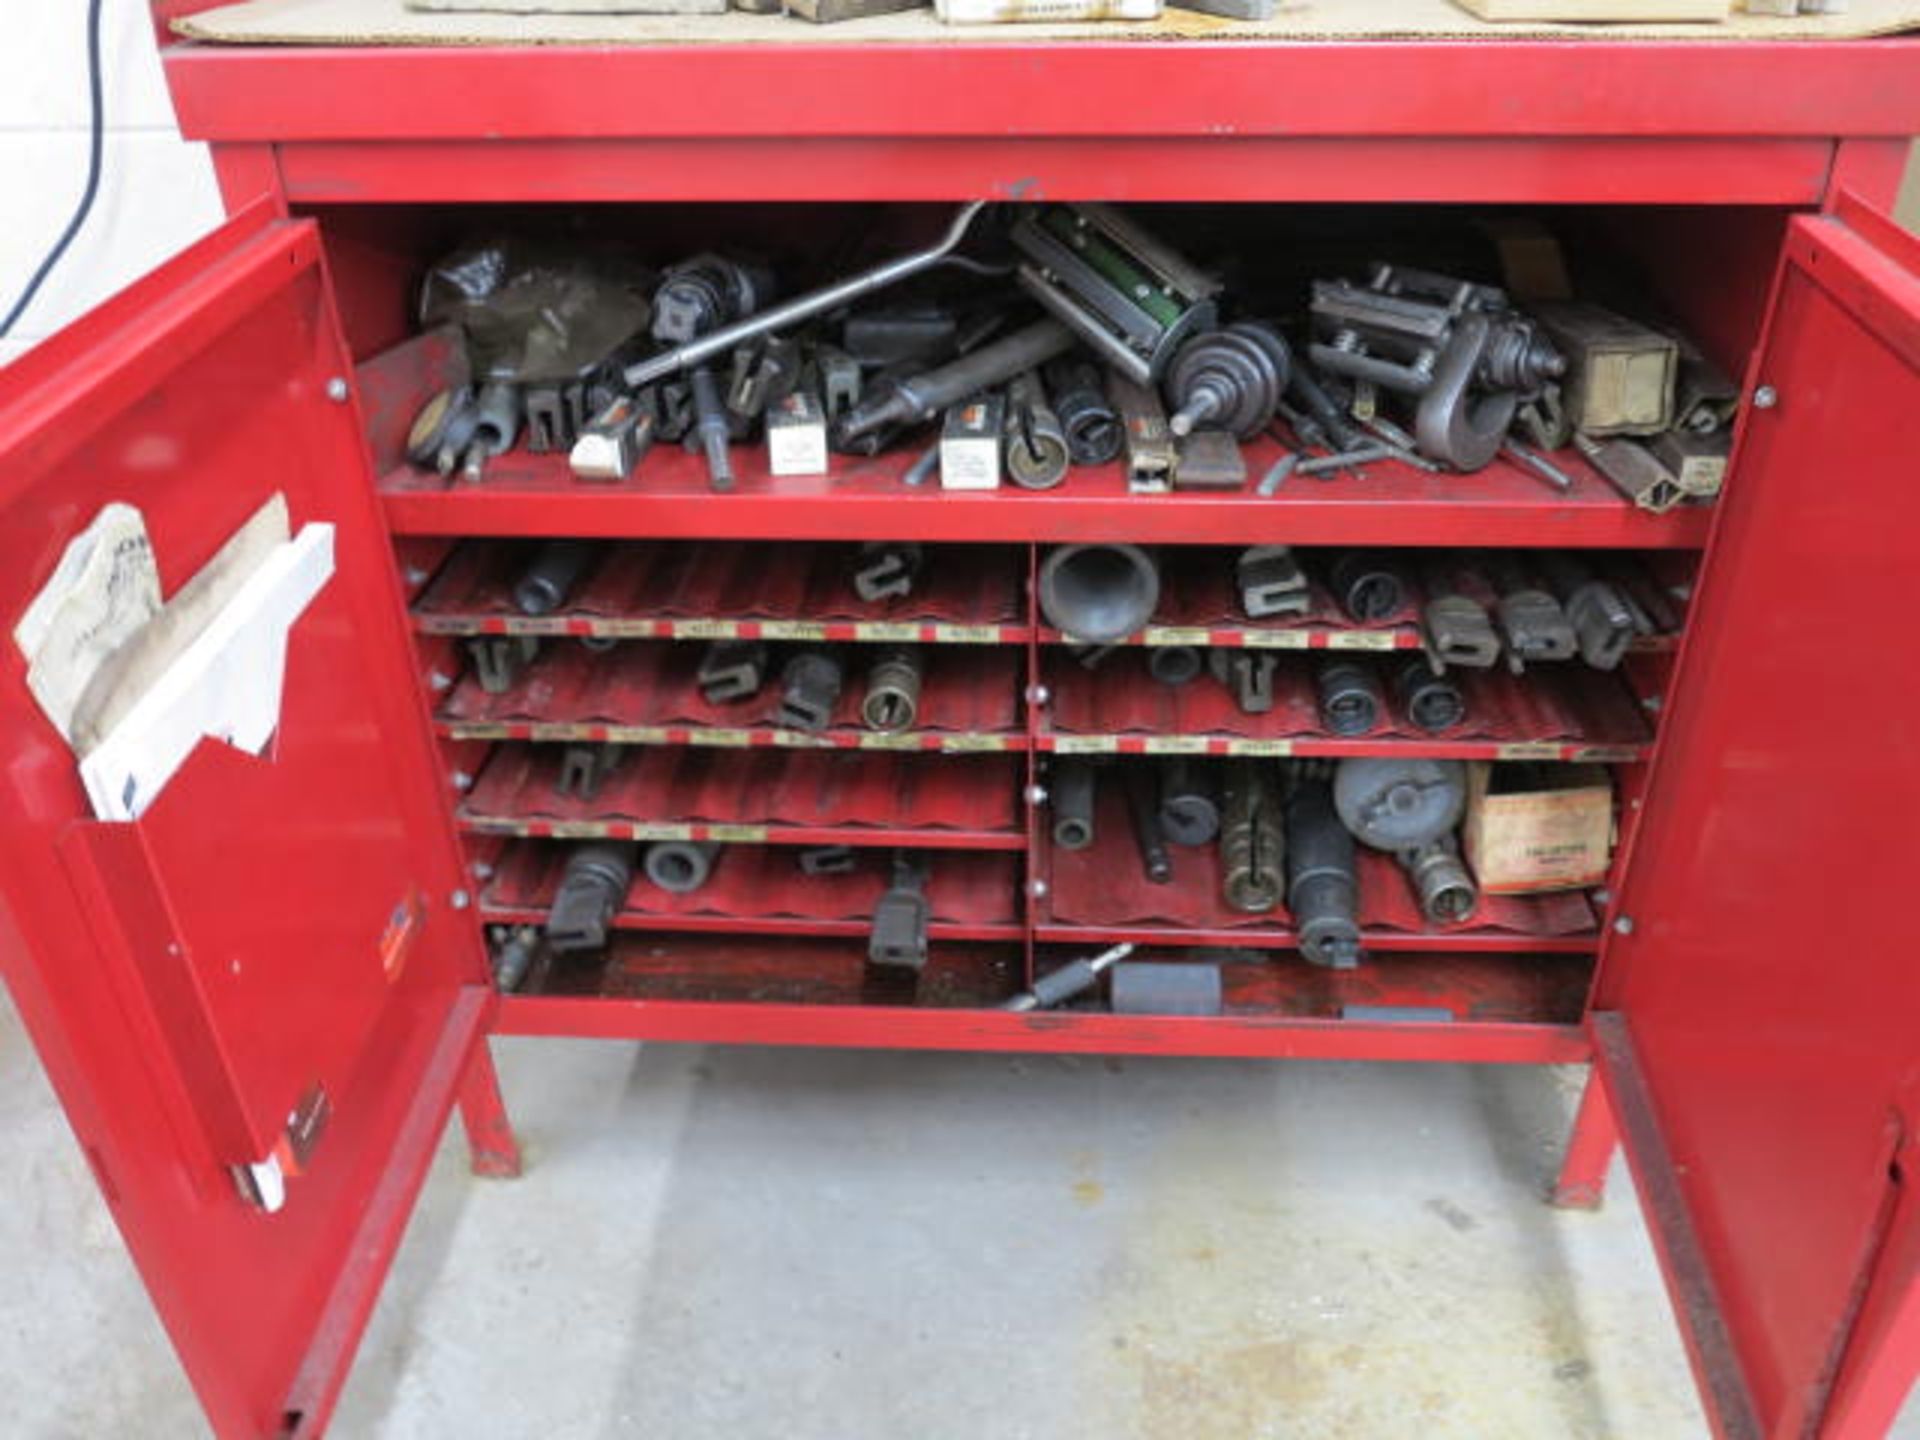 Sunnen Model LBB-1699 Precision Honing Machine S/N 15389 with Parts Cabinets, Hones Attachments - Image 2 of 2